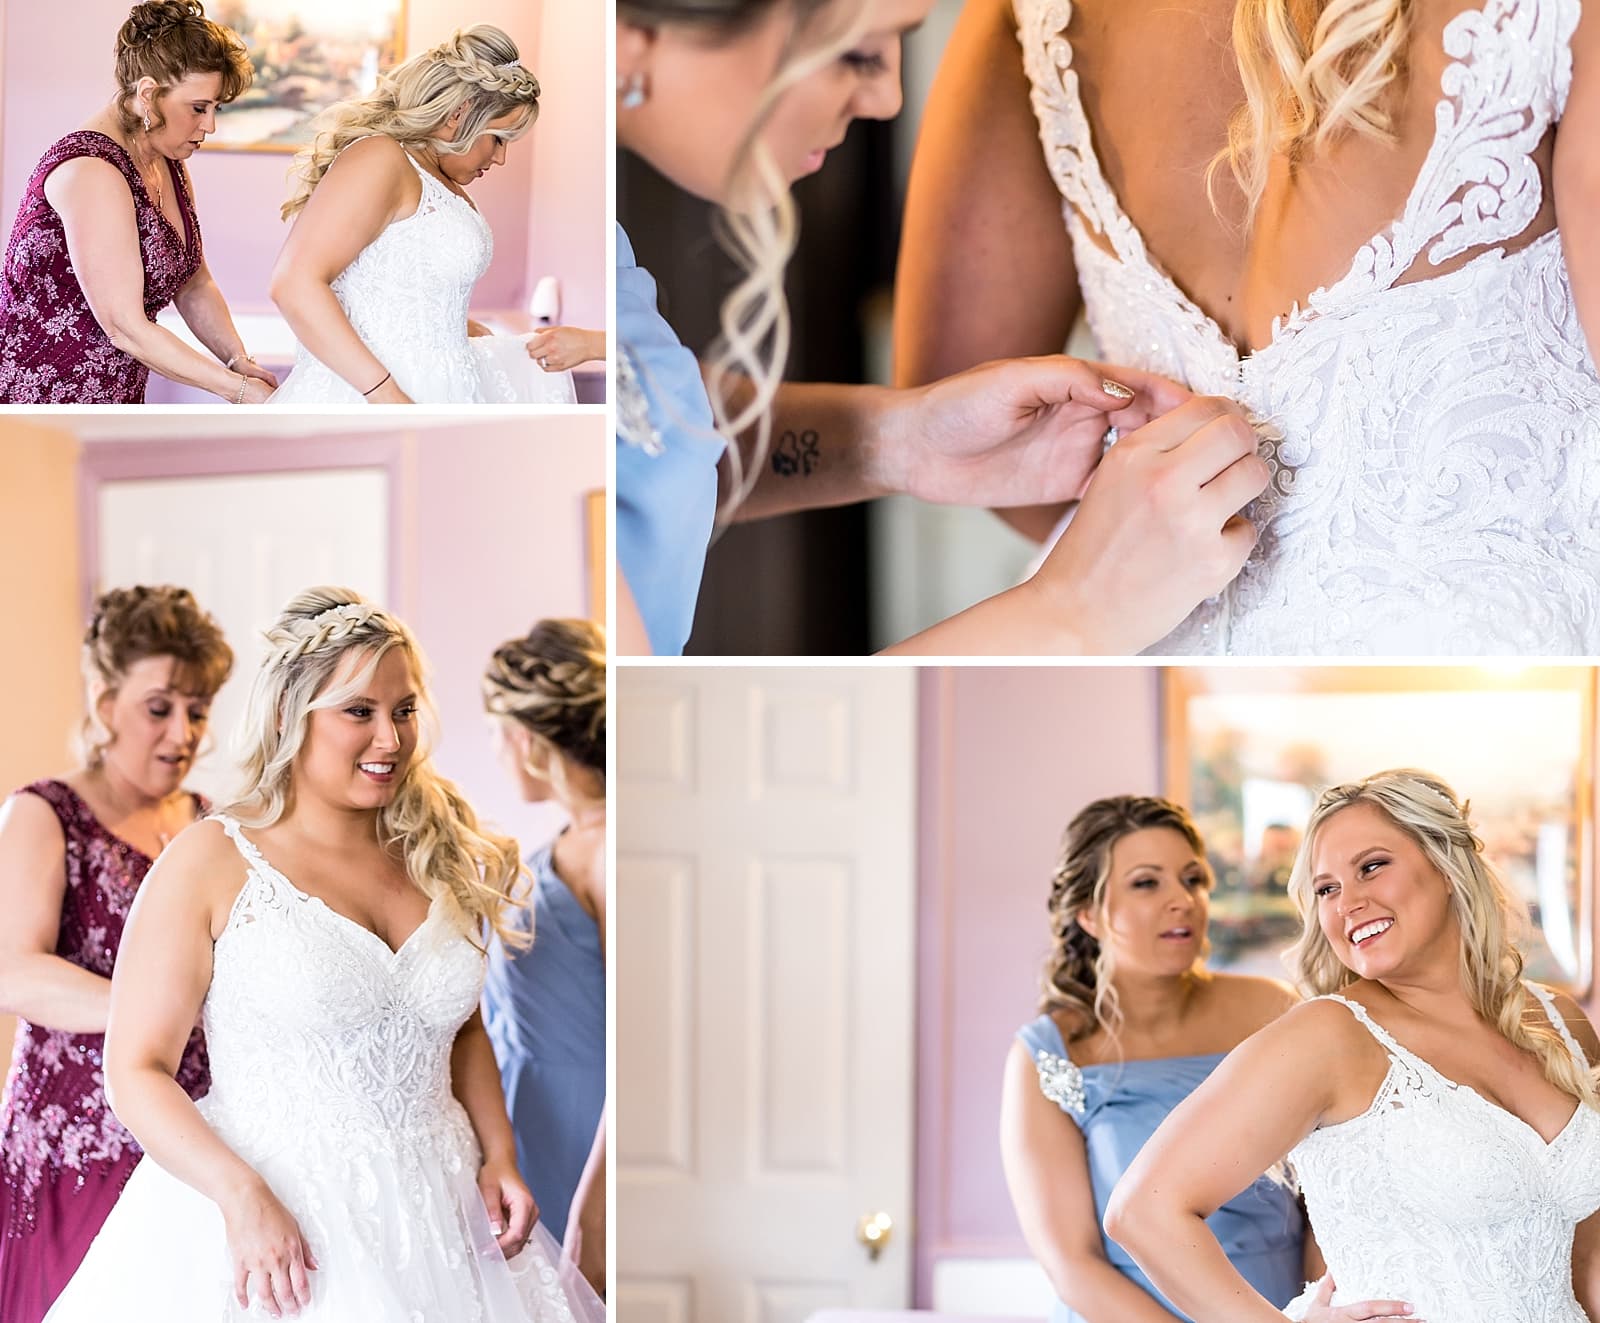 Bride getting into her Martina Liana wedding gown with her mother and maid of honor.